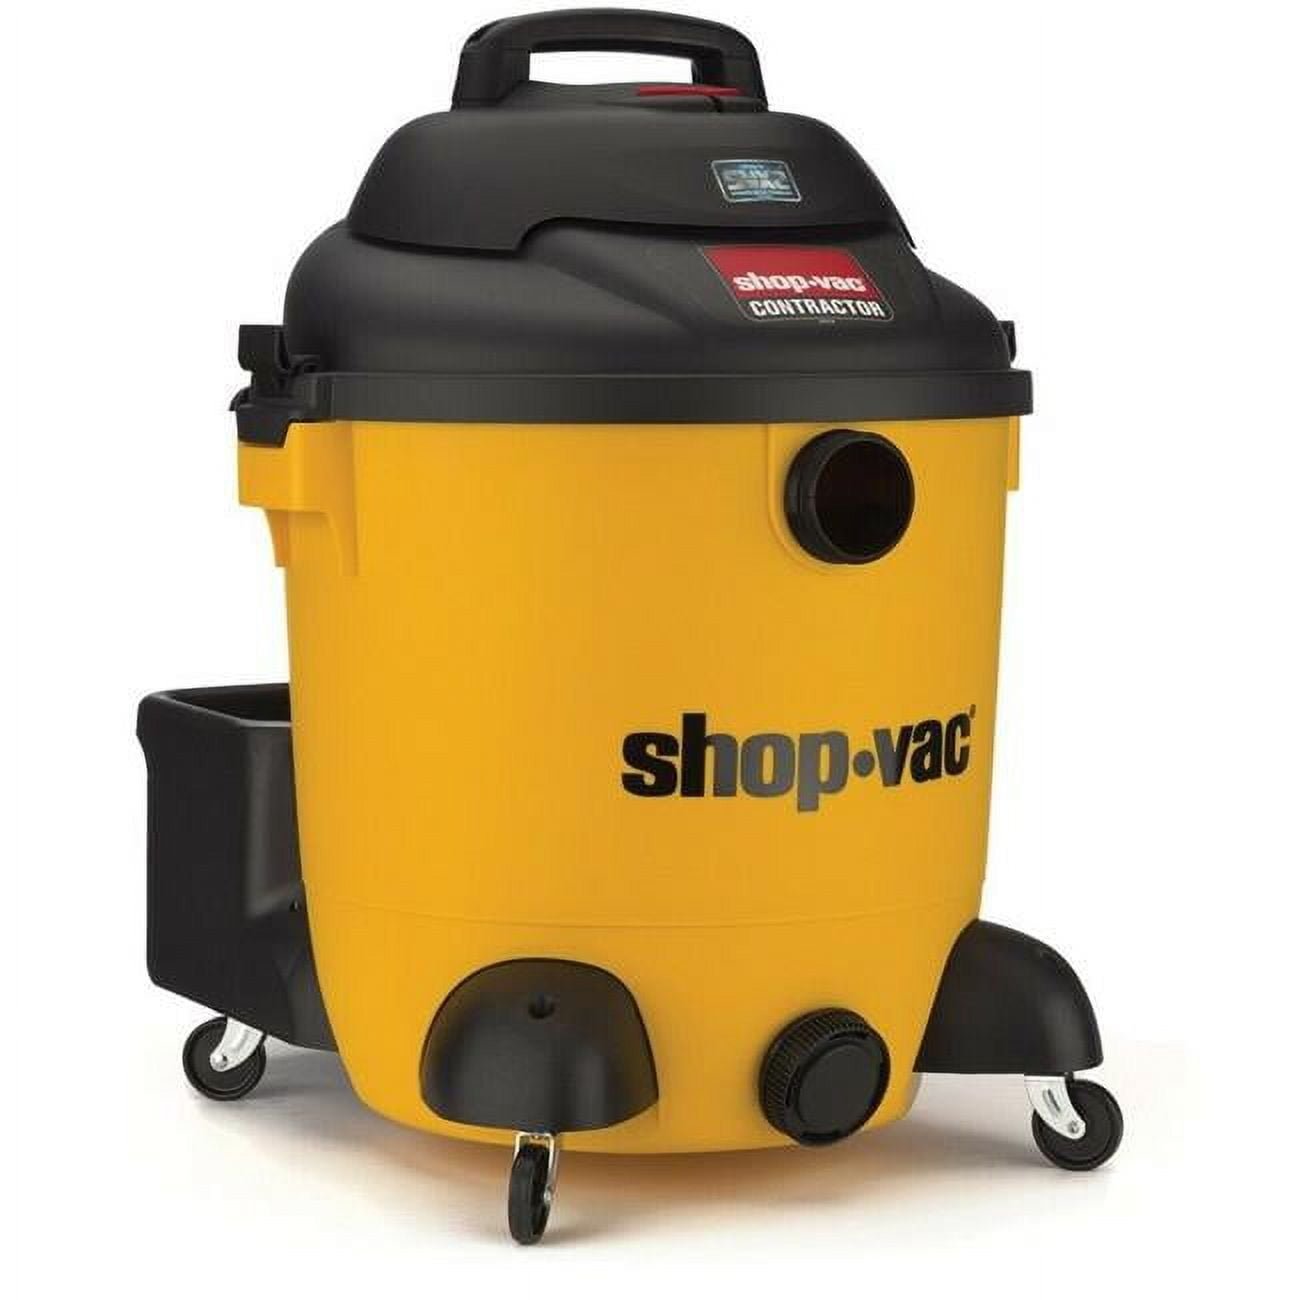 Shop-vac 9627110 12 Gal 5.5php Contractor Canister Vacuum Cleaner